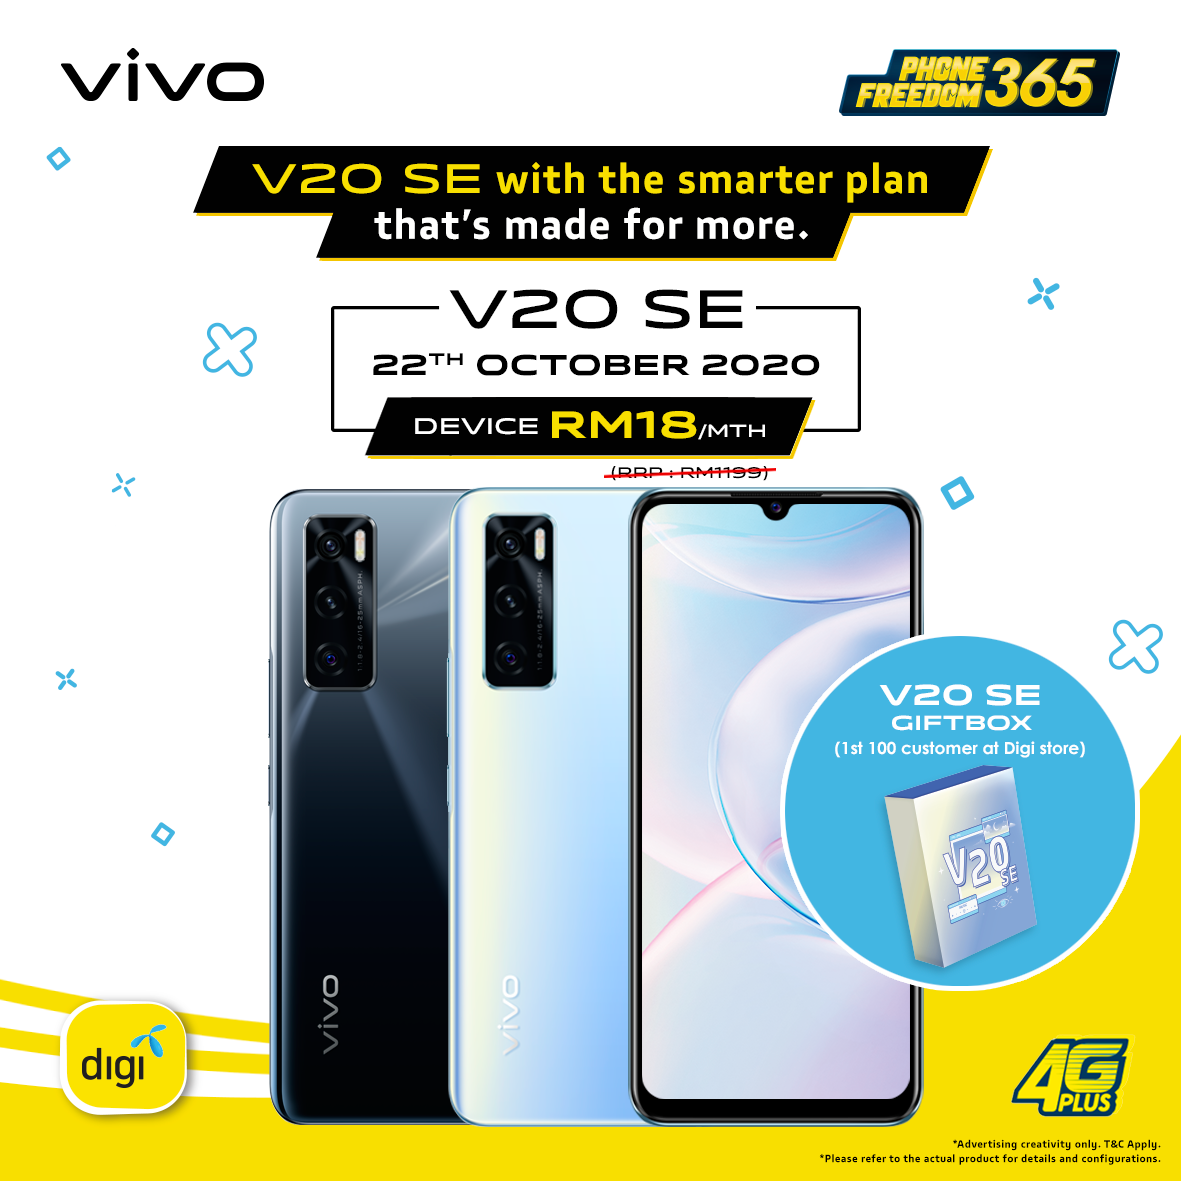 Vivo S Latest V20 Series Selfie Smartphones Are Now Available With Digi Phonefreedom 365 Special Deals Siennylovesdrawing Medium